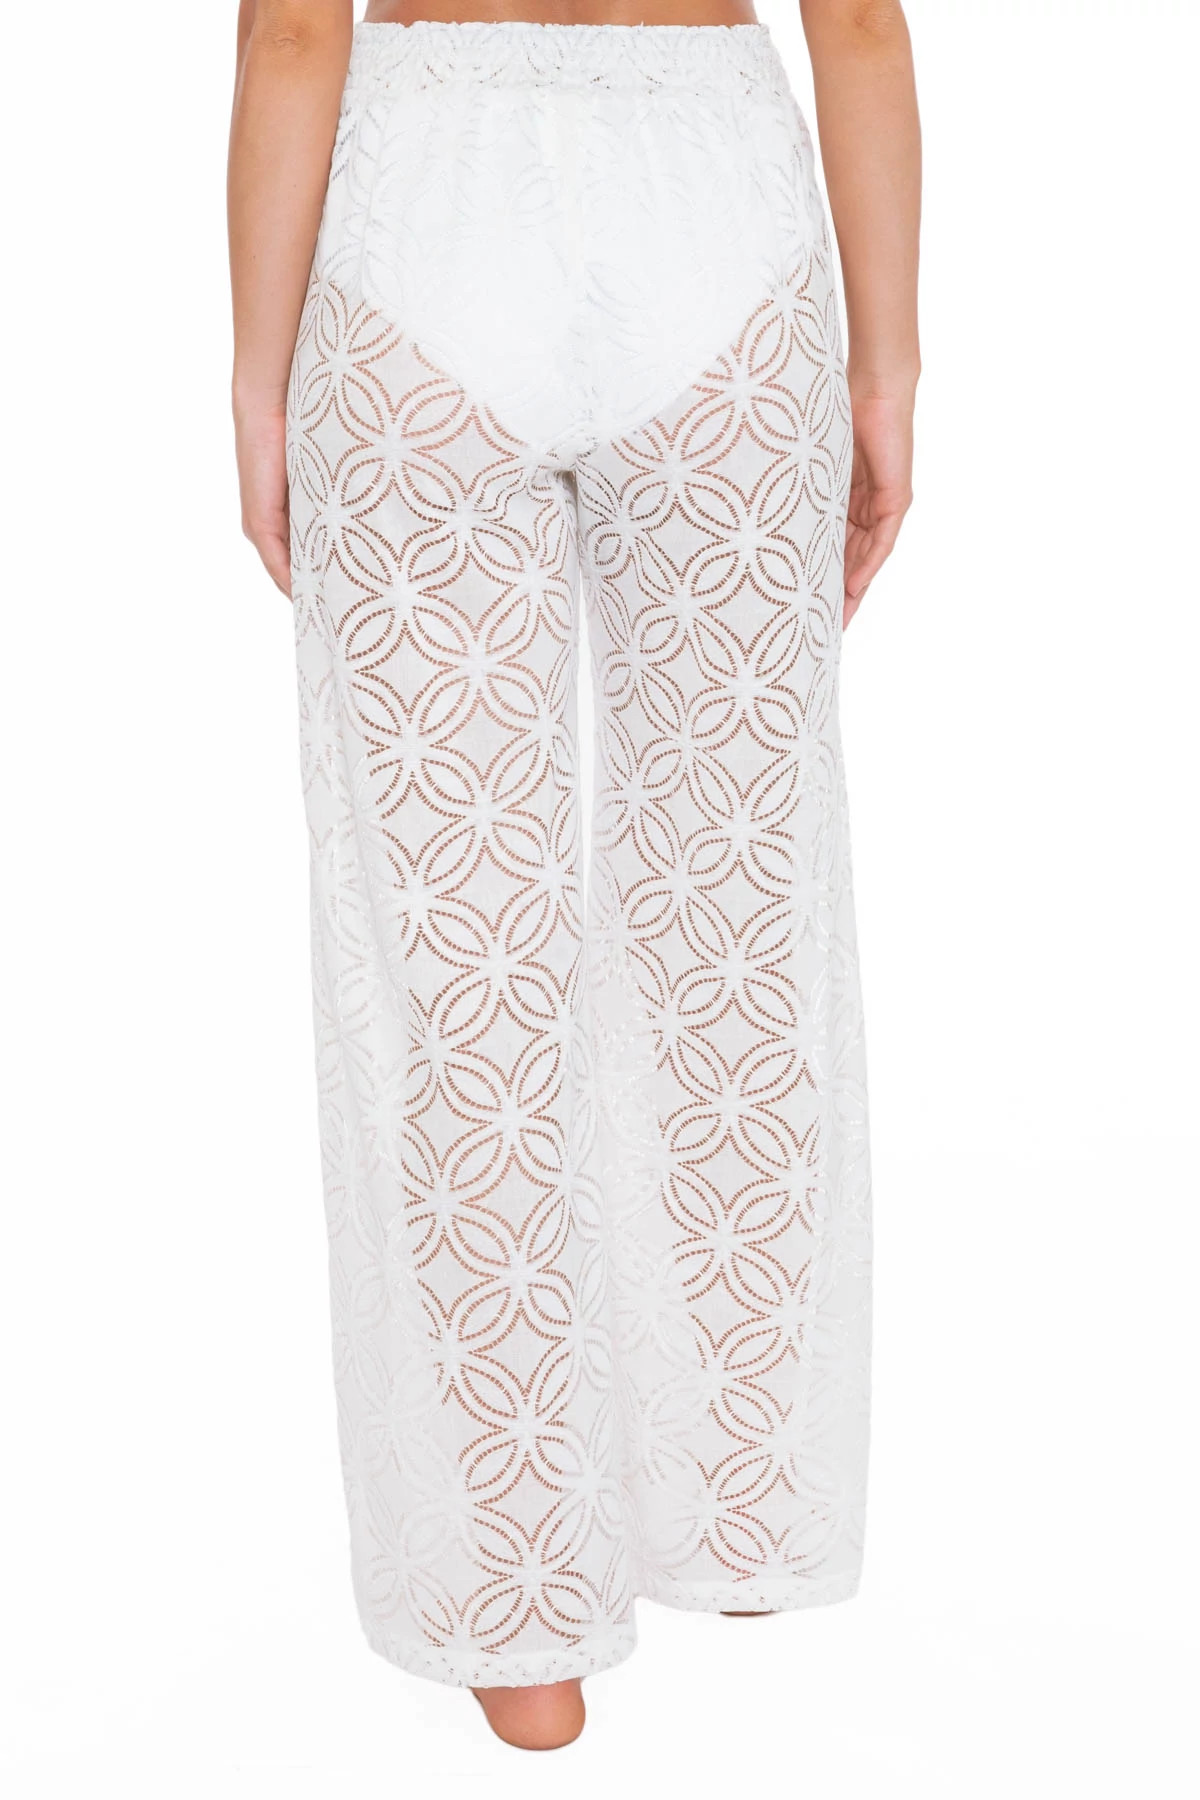 WHITE Pacheco Crochet Pants image number 2